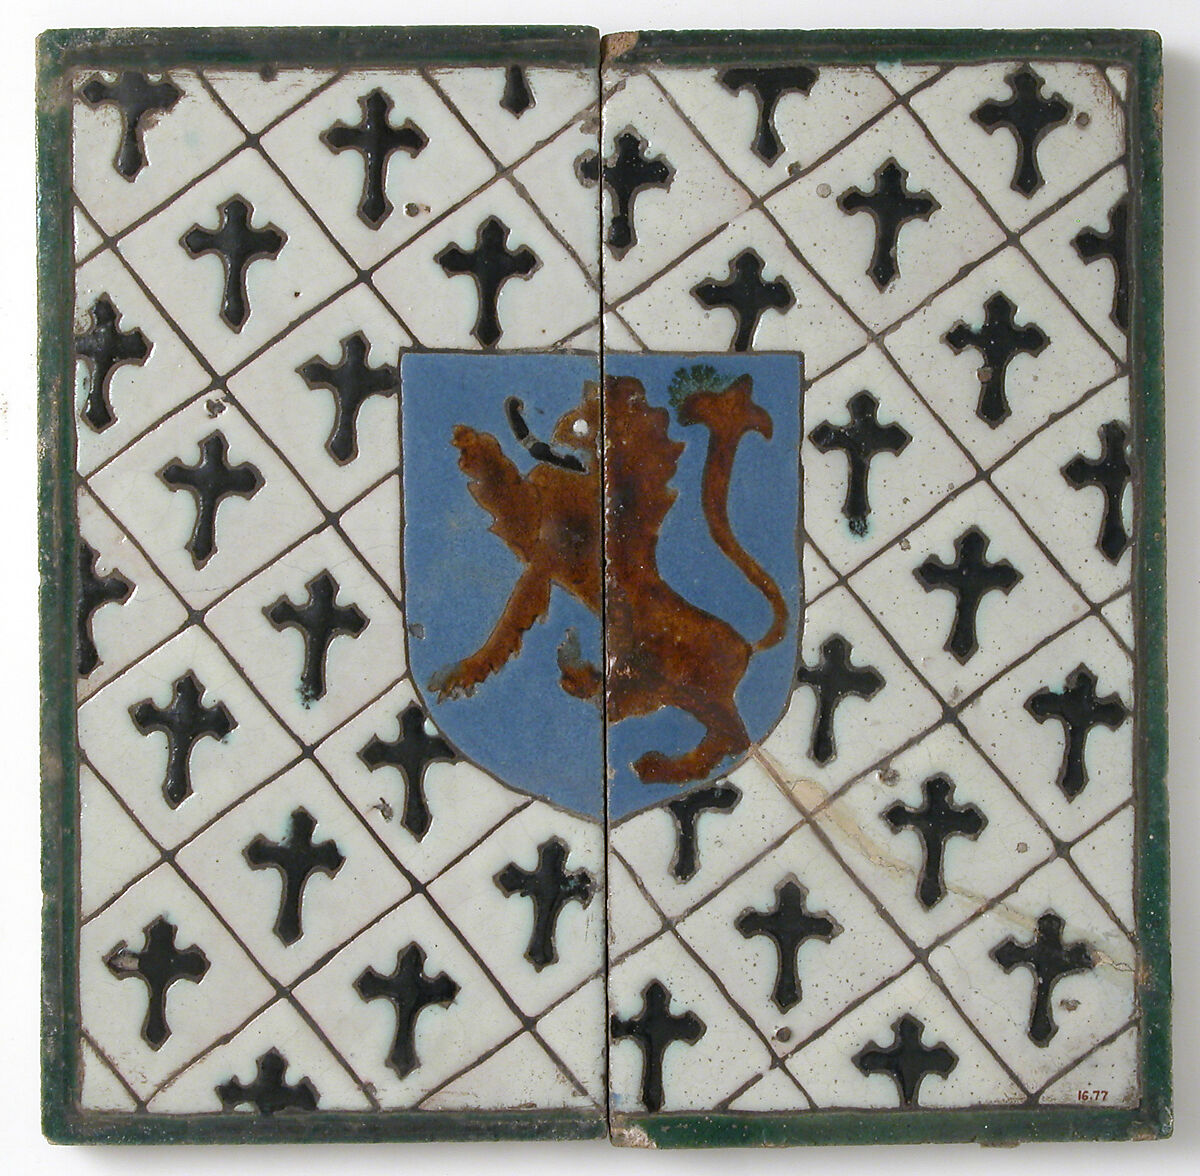 Tiles with a Lion on a Shield, Tin-glazed earthenware (cuerda seca technique), Spanish 